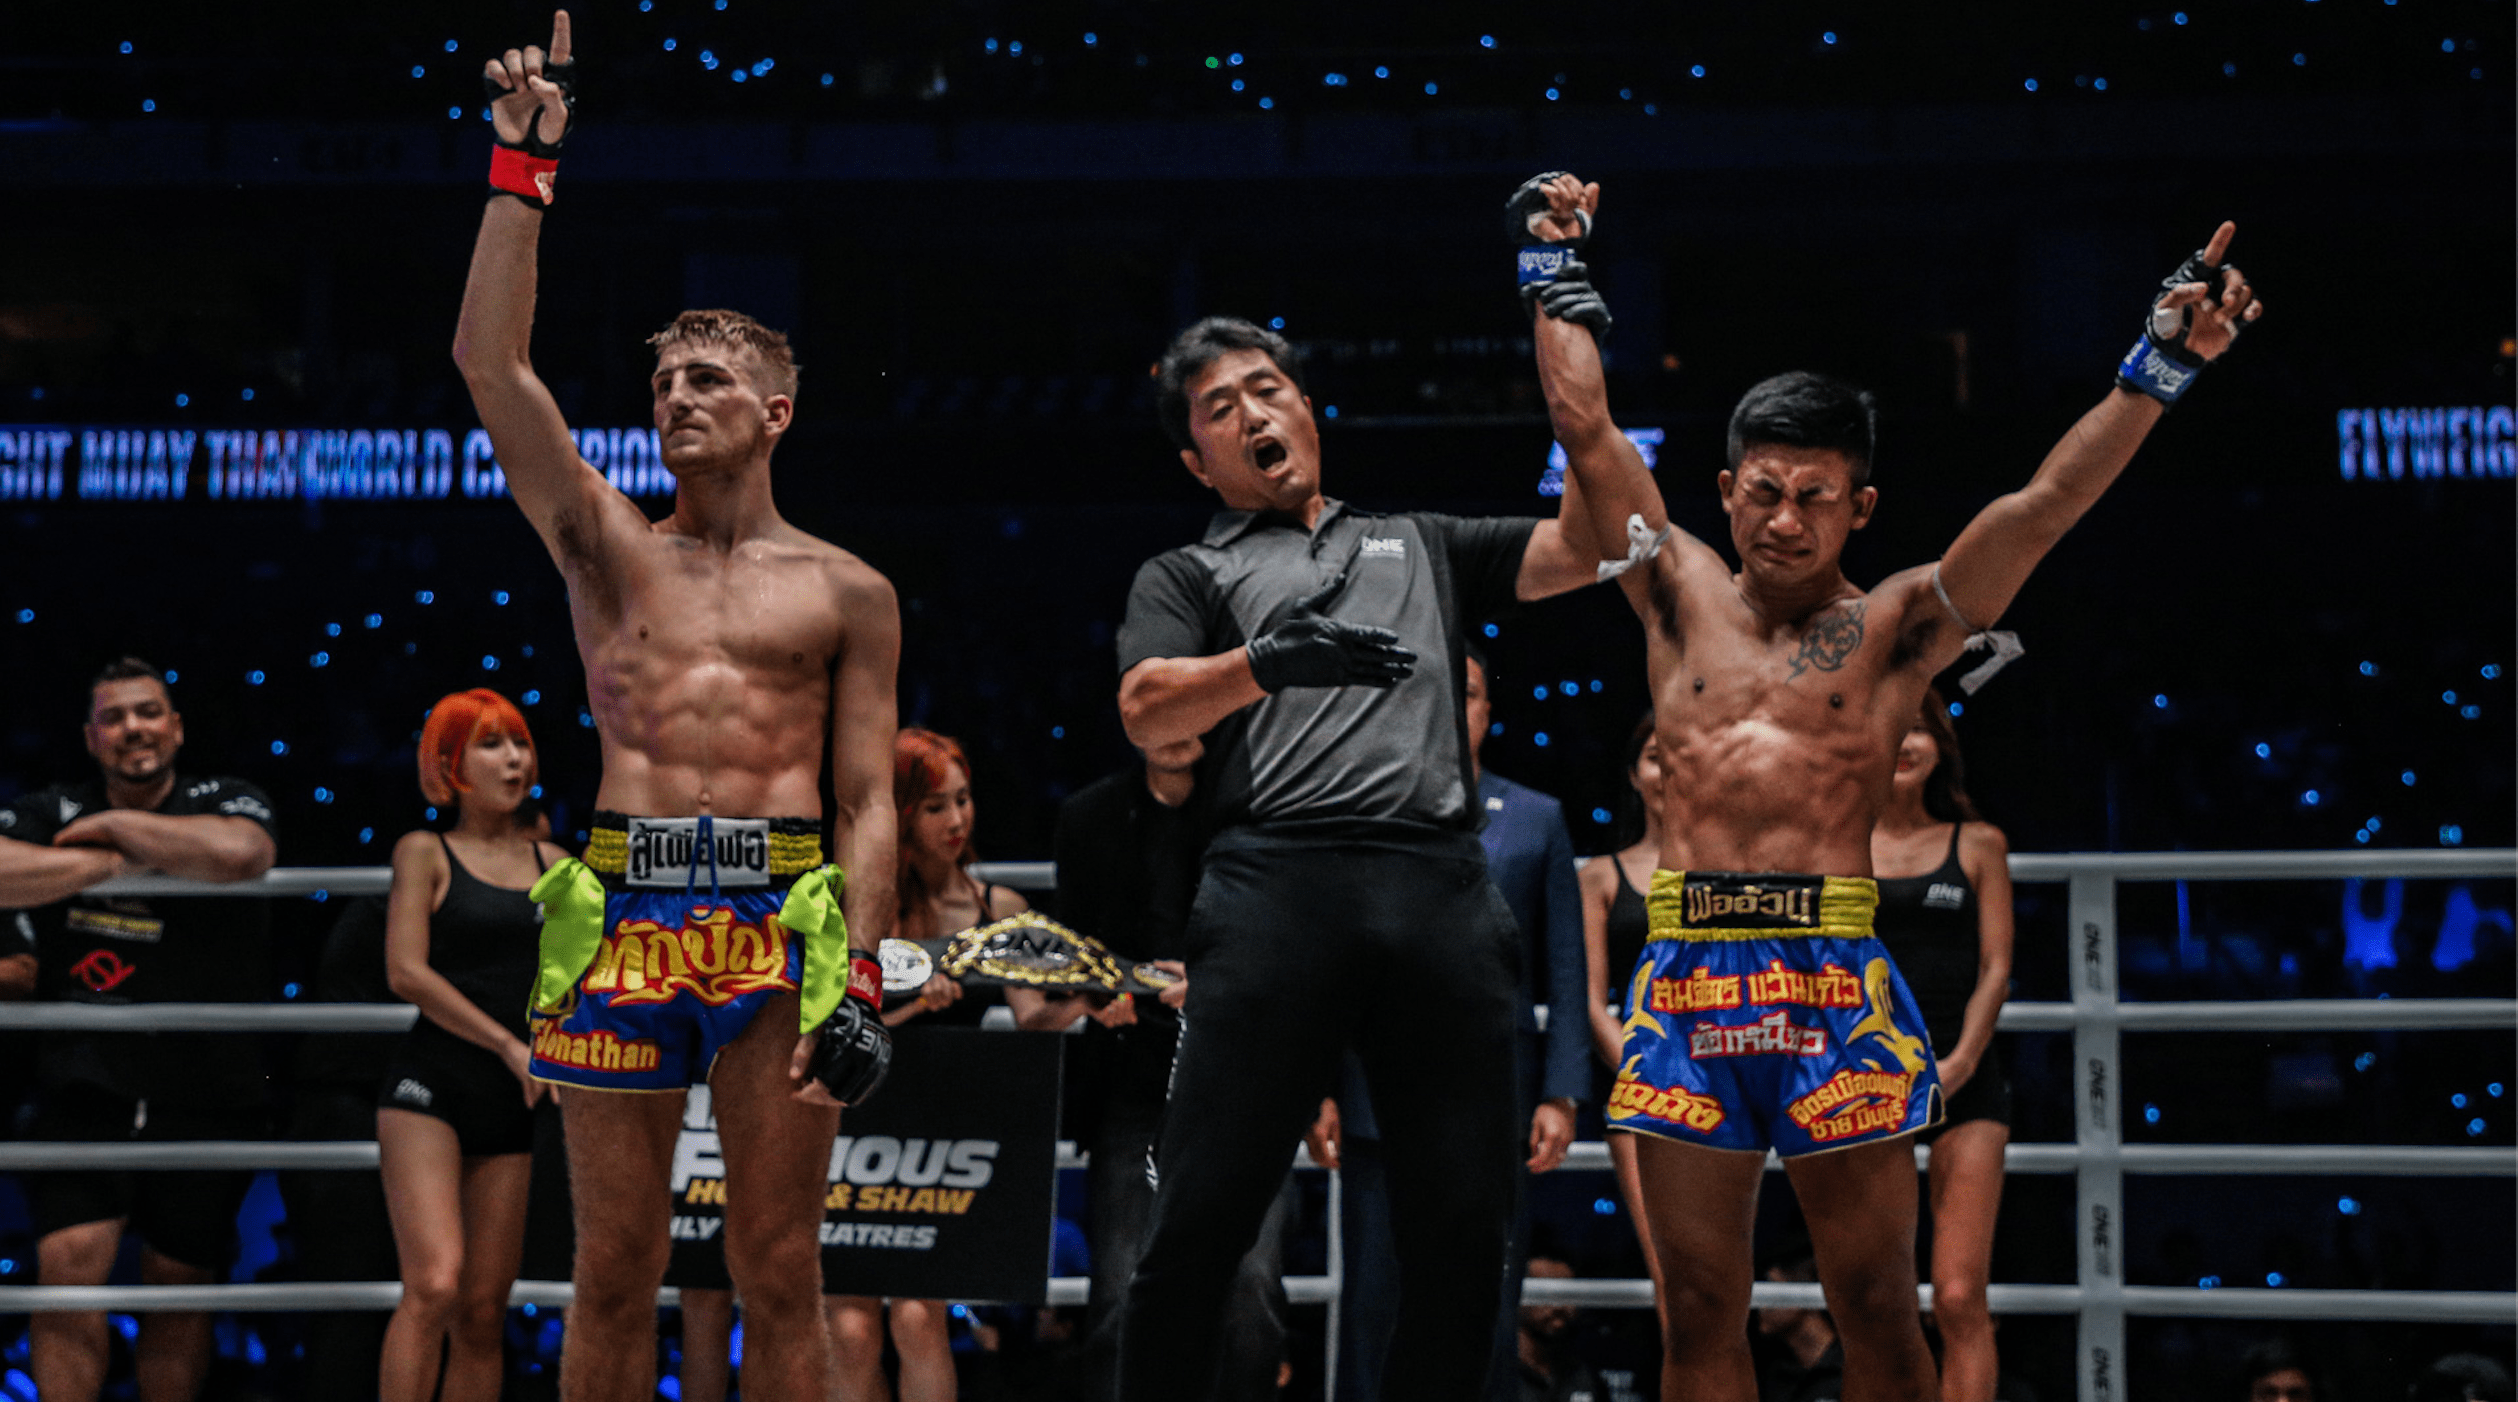 Rodtang To Defend Title Against Haggerty At ONE: A New Tomorrow